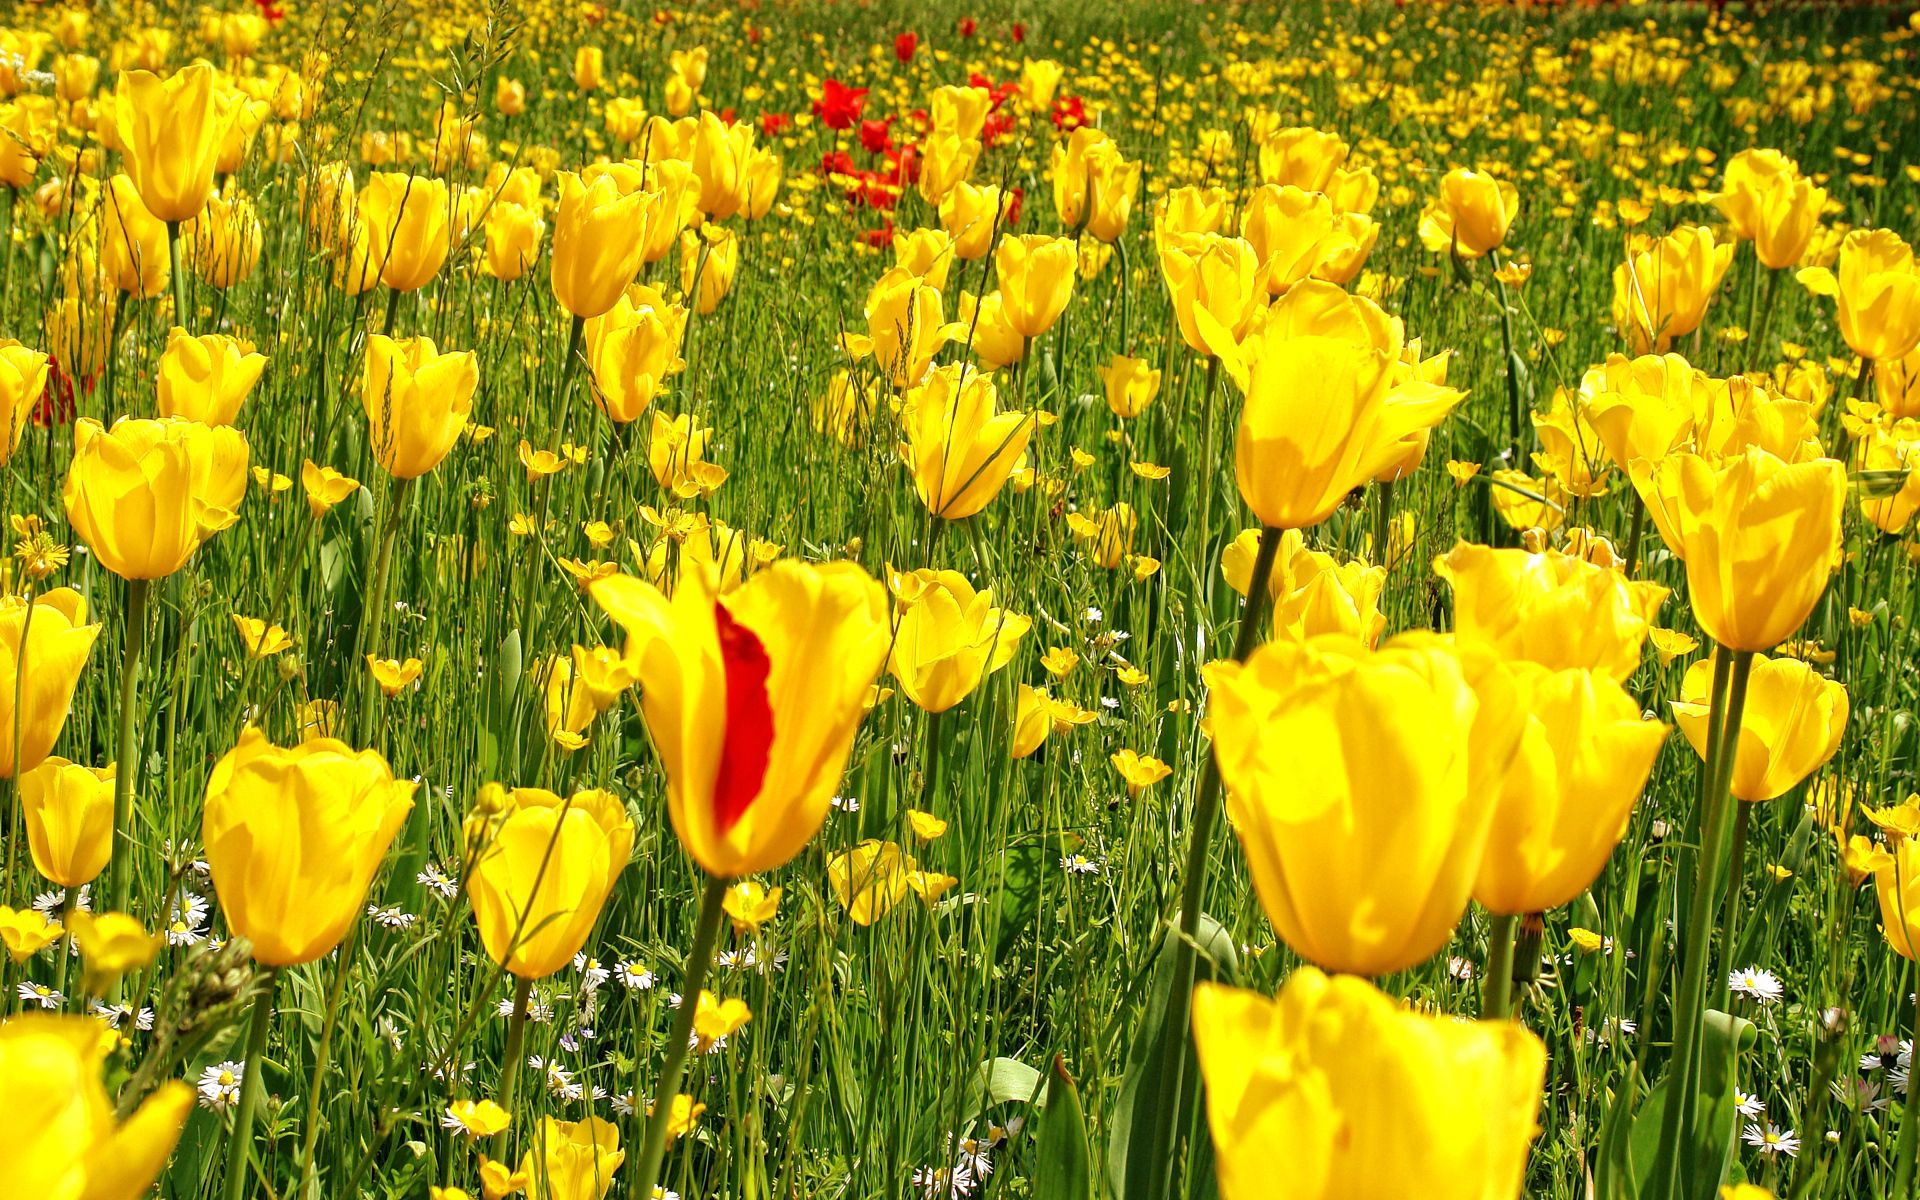 Wallpaper Full HD meadow, nature, flowers, grass, tulips, dandelions, camomile